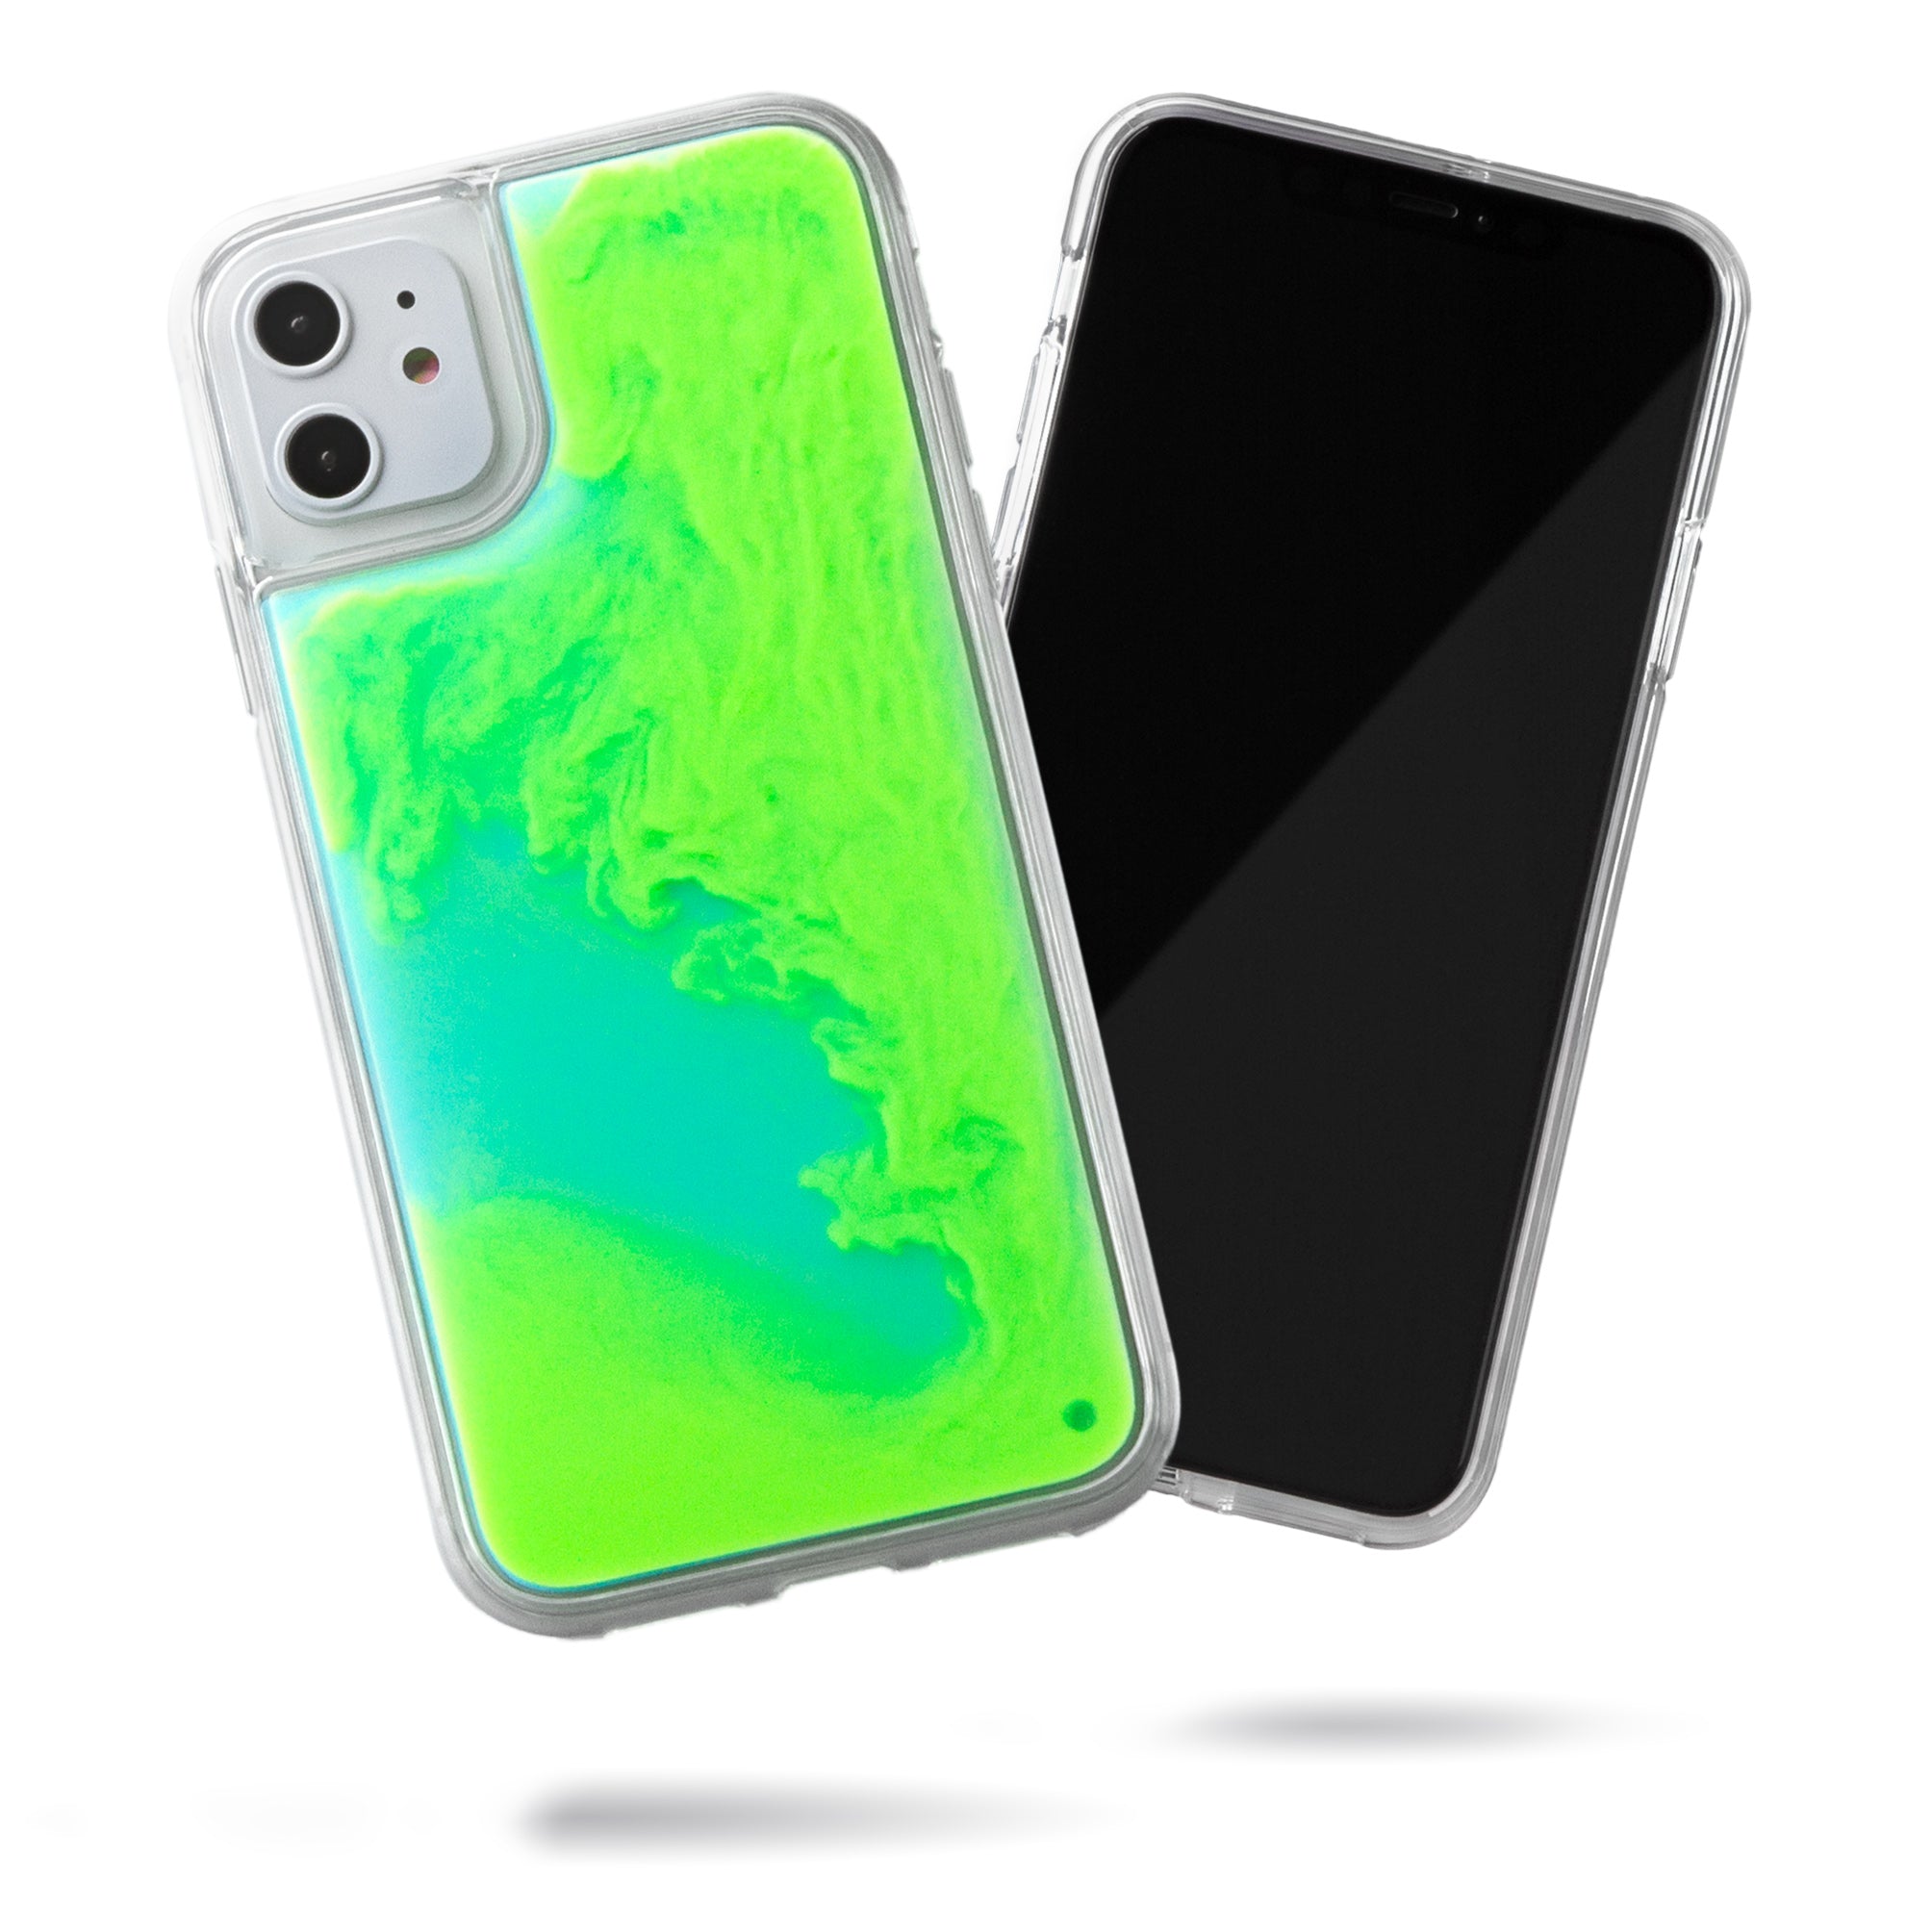 Neon Sand iPhone 11 Case - Mint and Neon Green Glow